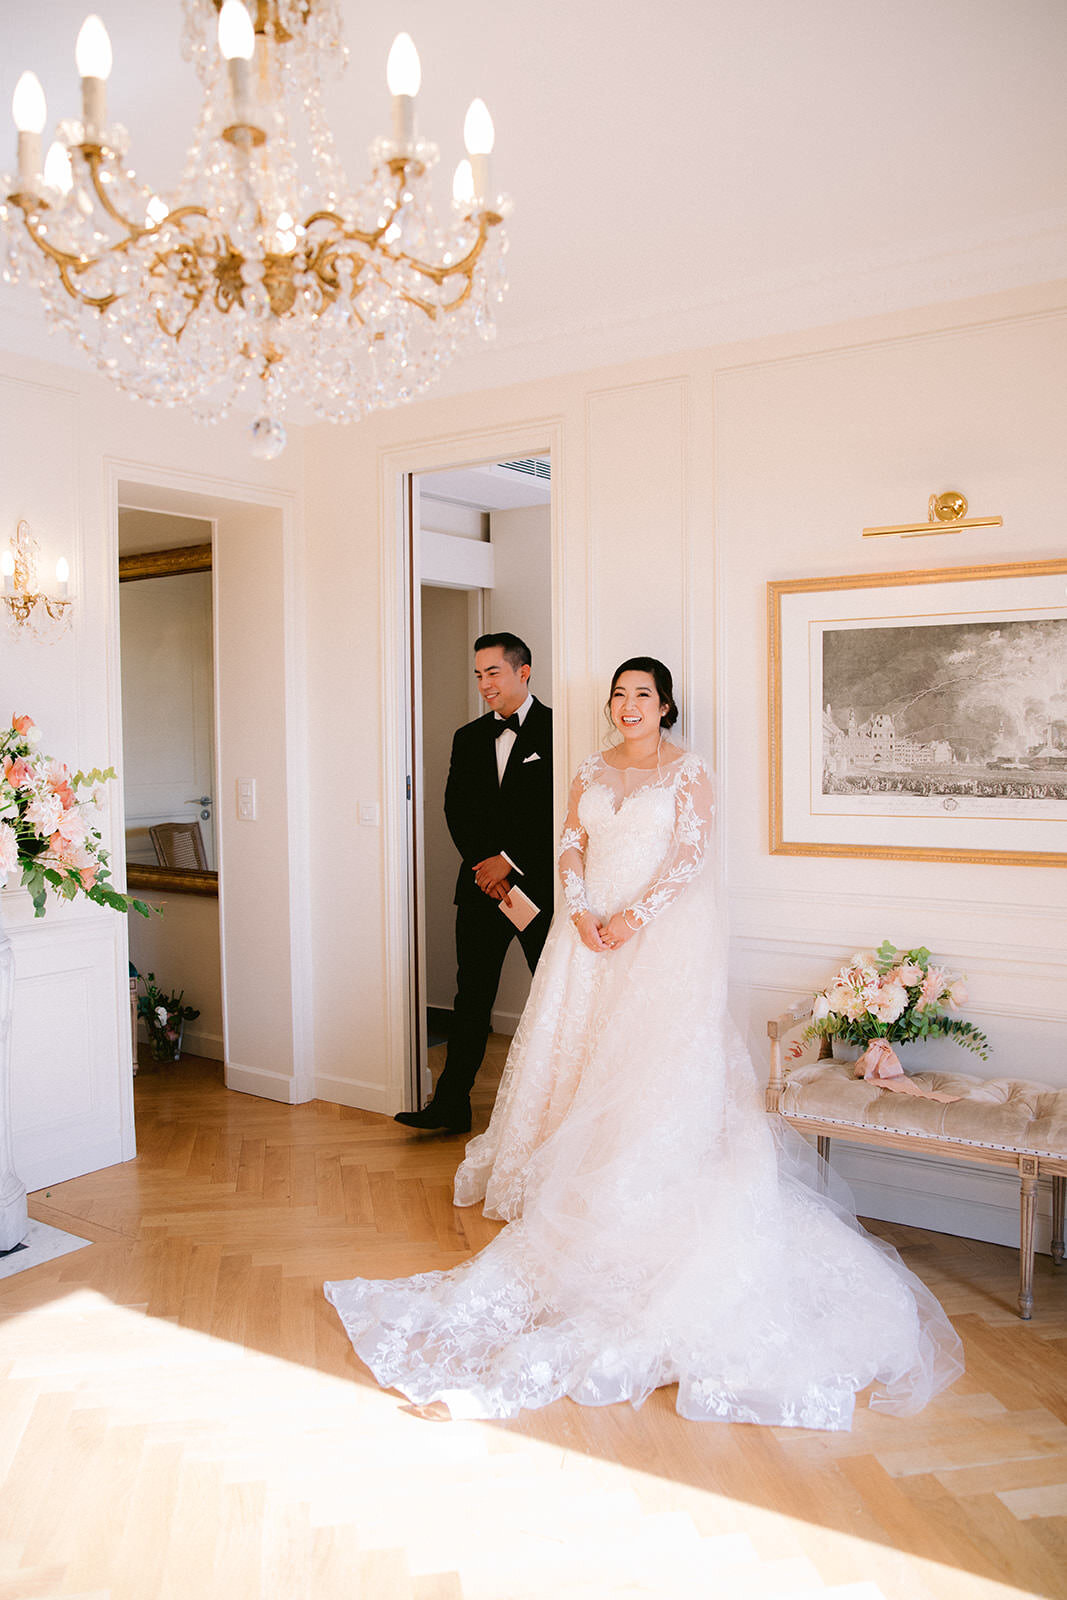  The moment before Brides and Groom's first look photoshoot for their destination Paris wedding  